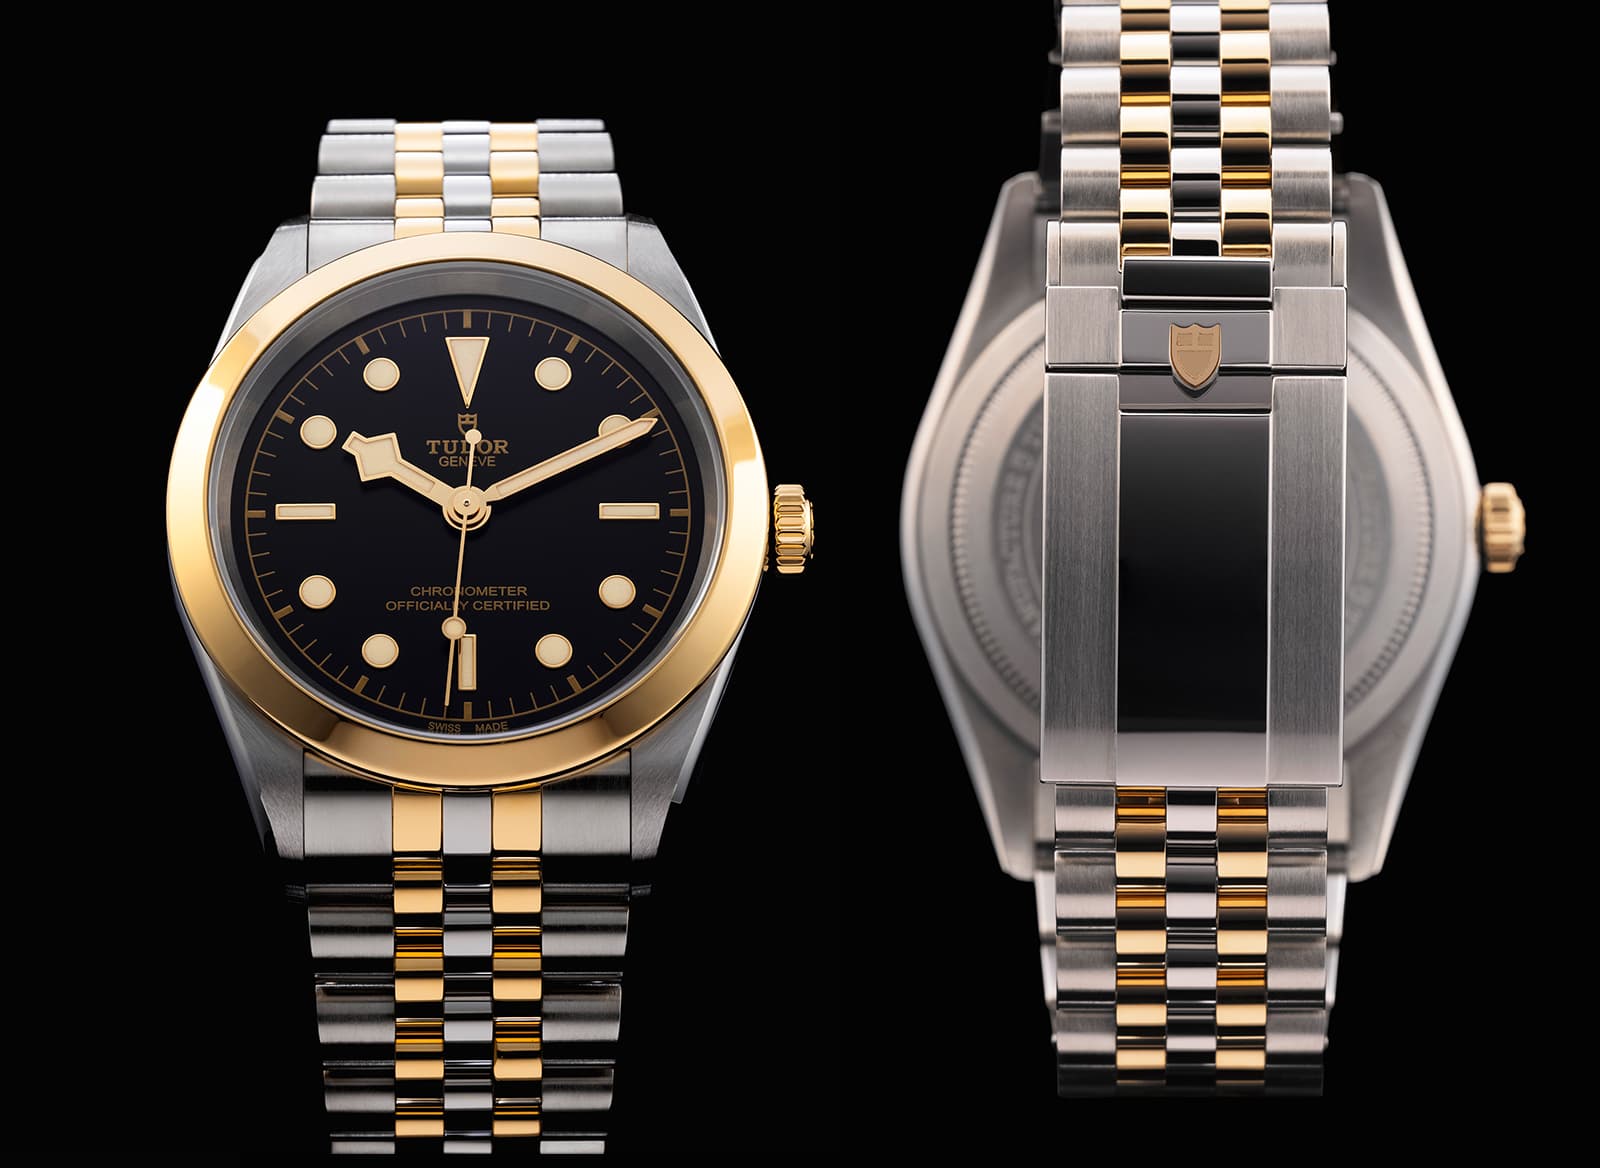 Tudor The watch brand releases two new collections in silver and gold